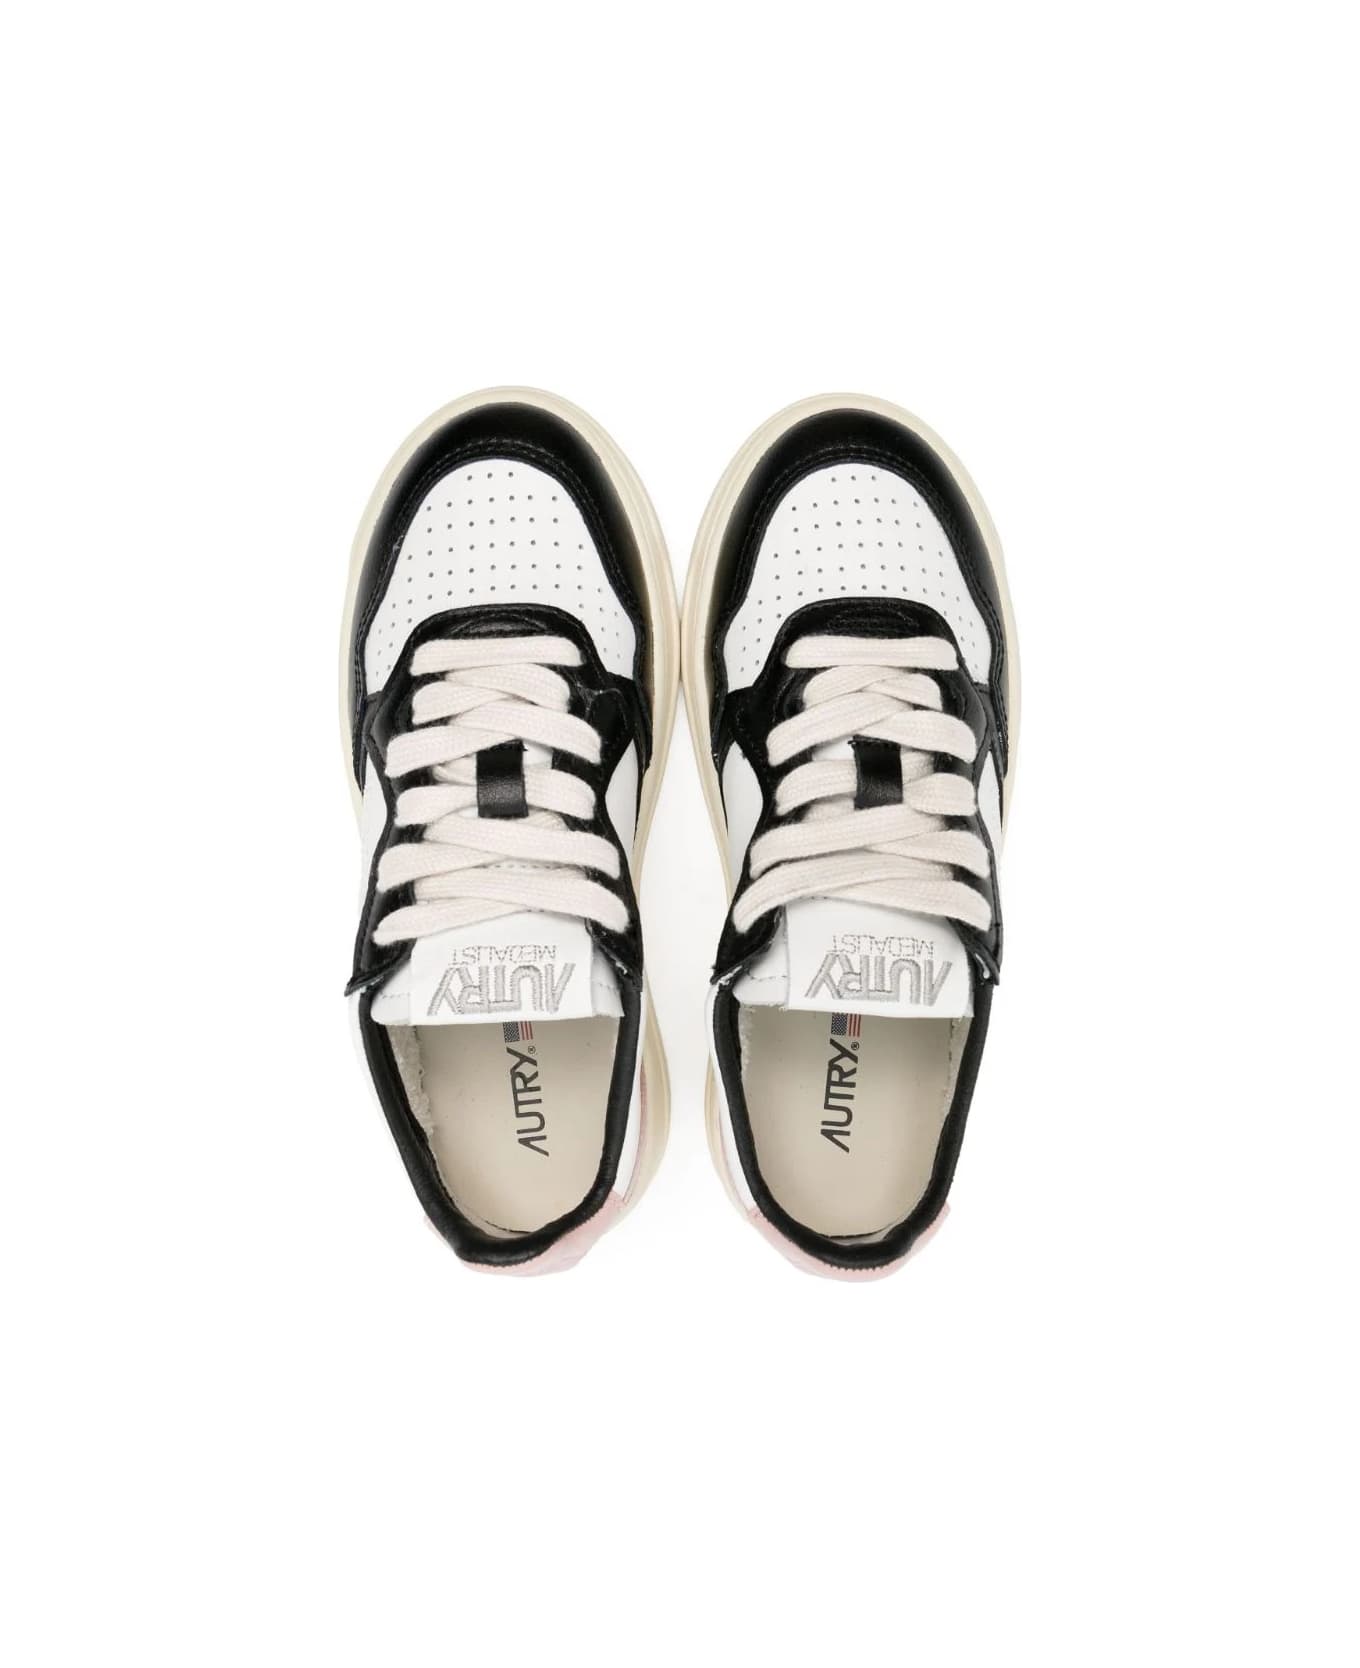 Autry White, Pink And Black Medalist Low Sneakers - Bianco シューズ